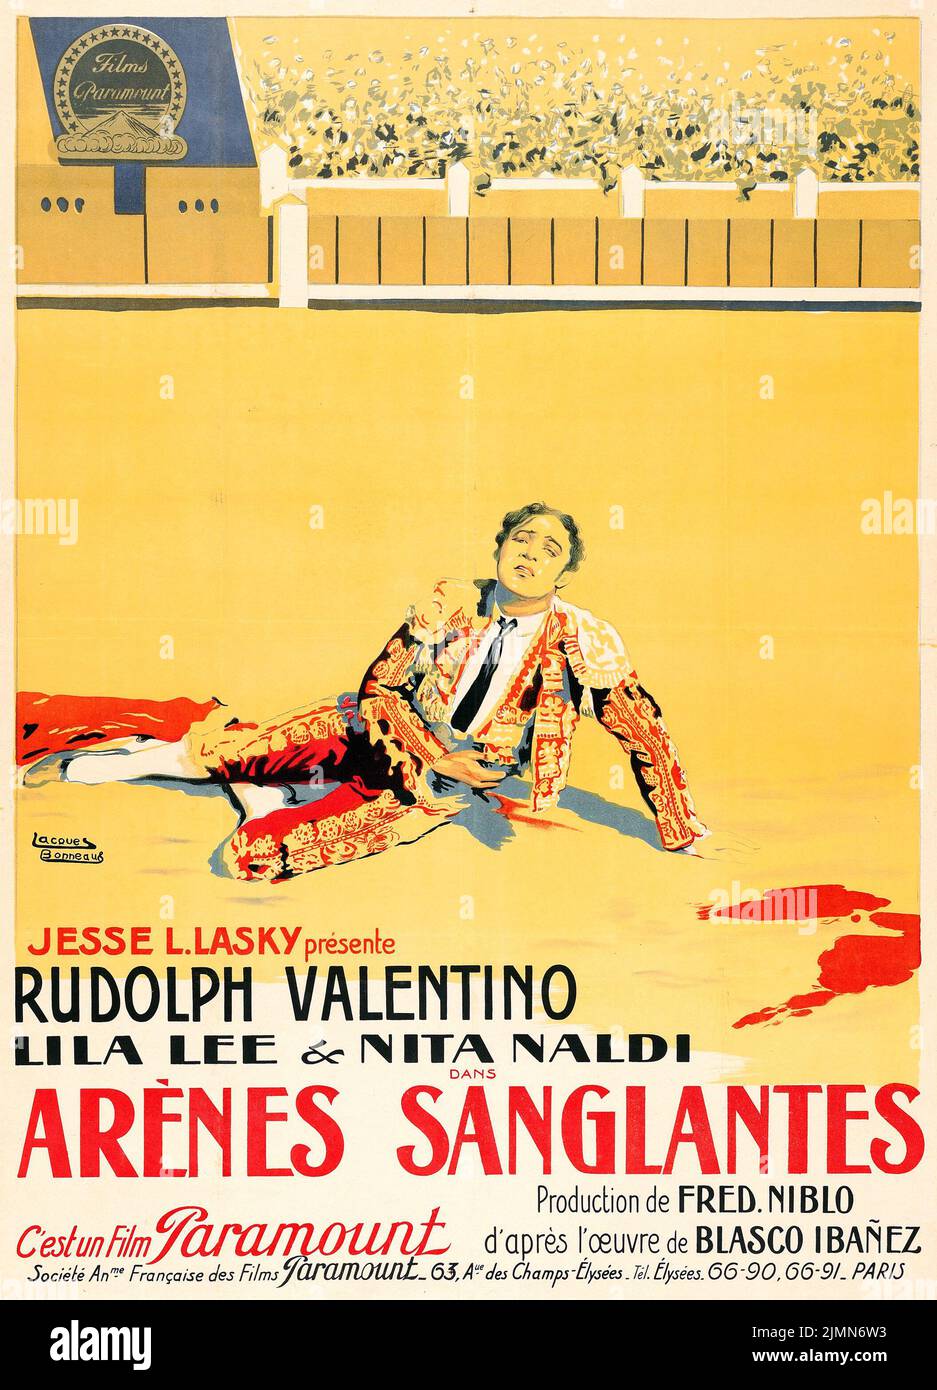 Blood and Sand (Paramount, 1922) French Grande poster - Jacques Bonneau Artwork - Rudolph Valentino - Vintage film poster Stock Photo